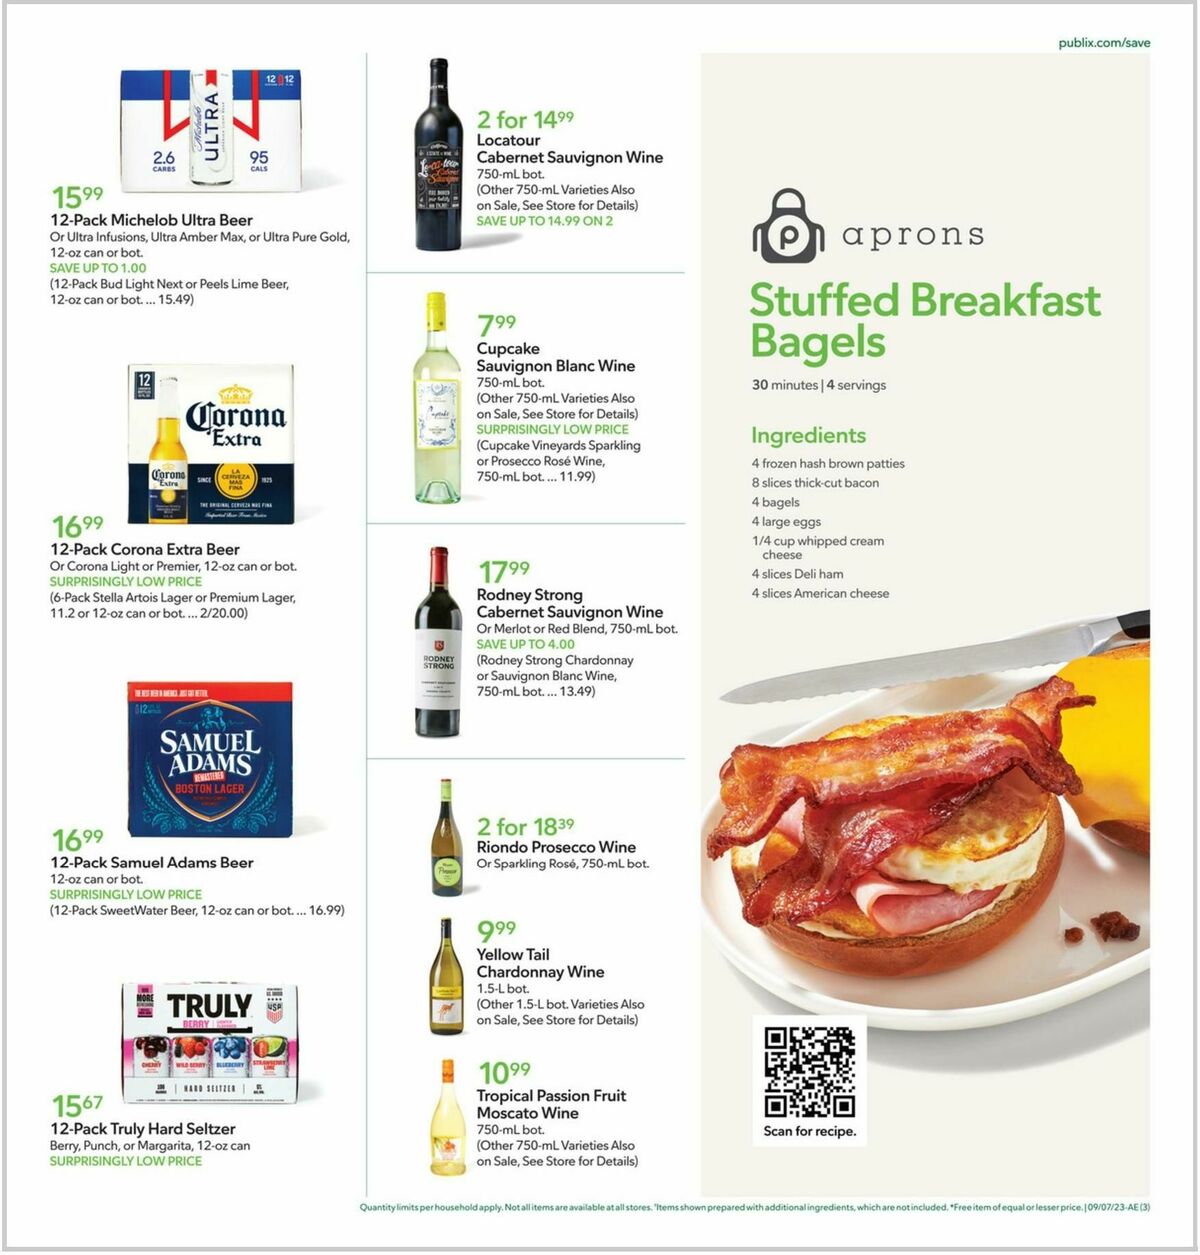 Publix Weekly Ad from September 6